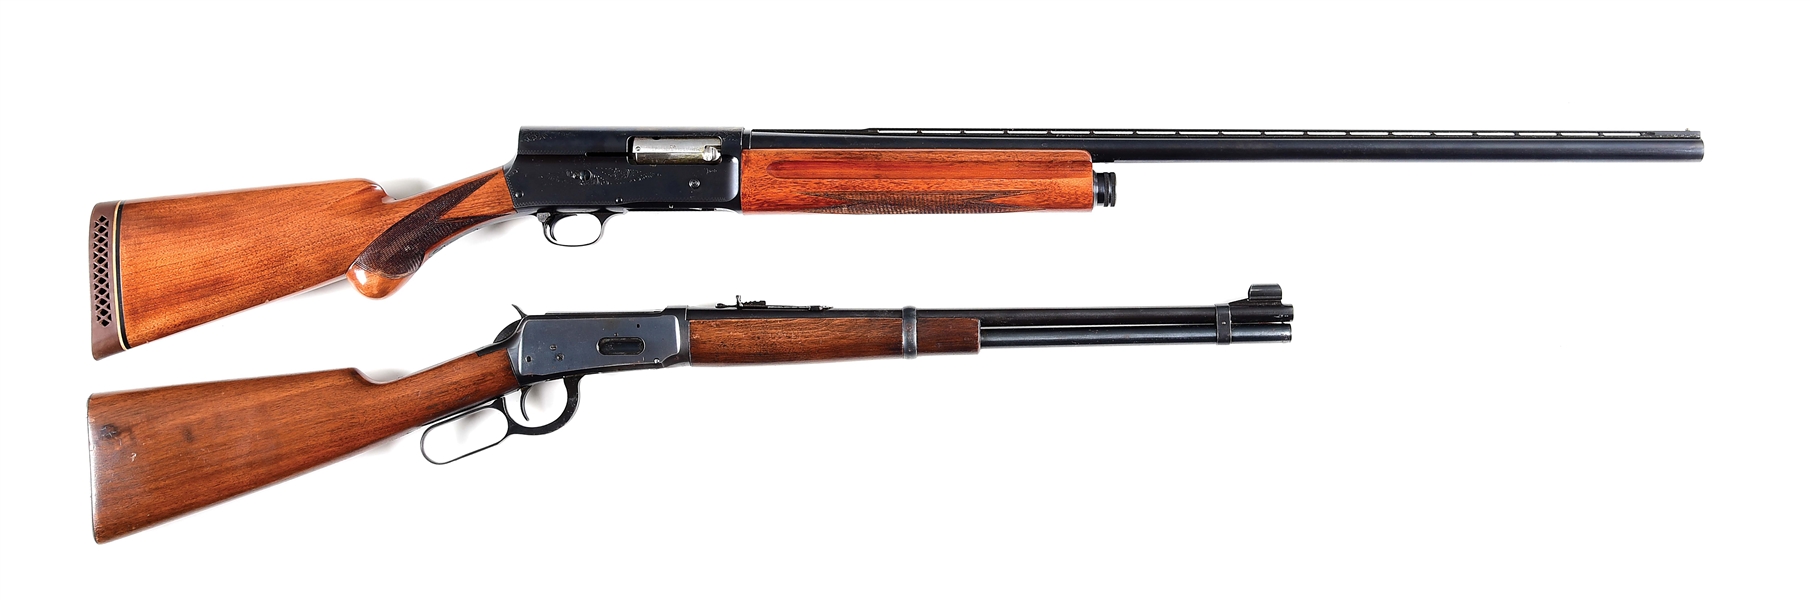 (C) LOT OF 2: BROWNING A5 MAGNUM SEMI AUTO SHOTGUN AND WINCHESTER 1894 .32 WS LEVER ACTION RIFLE.